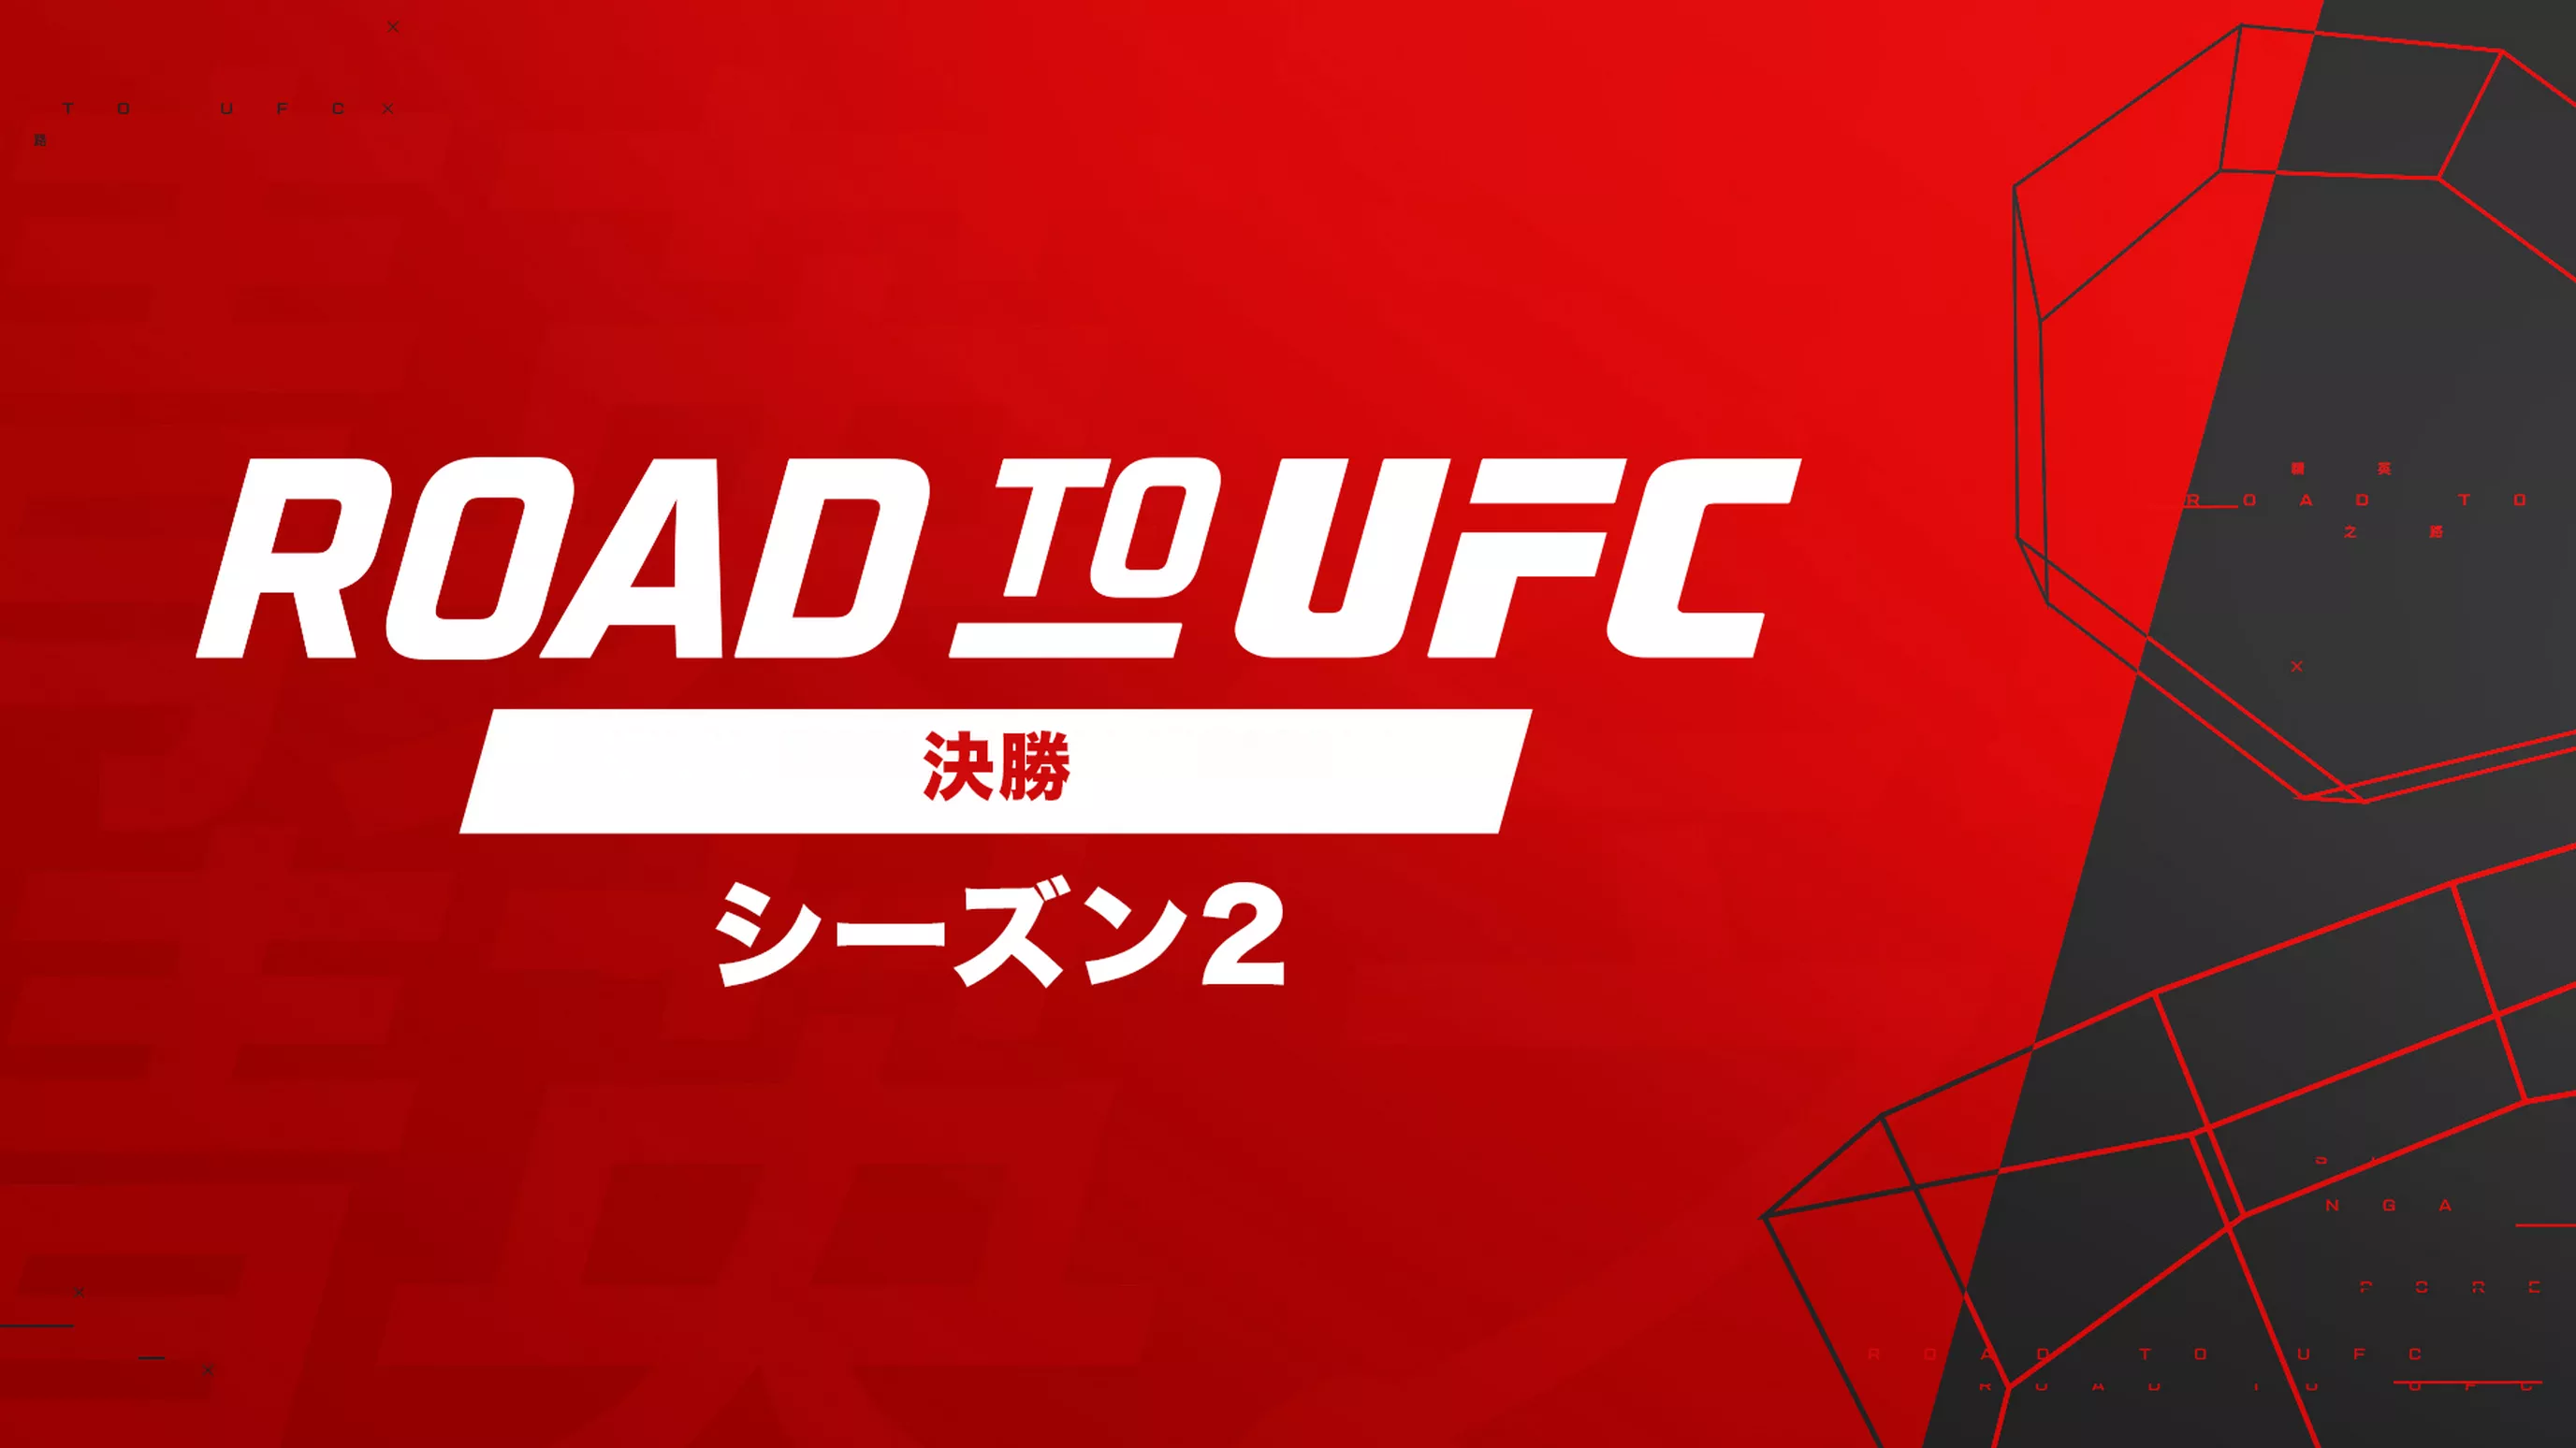 ROAD TO UFC シーズン2決勝戦